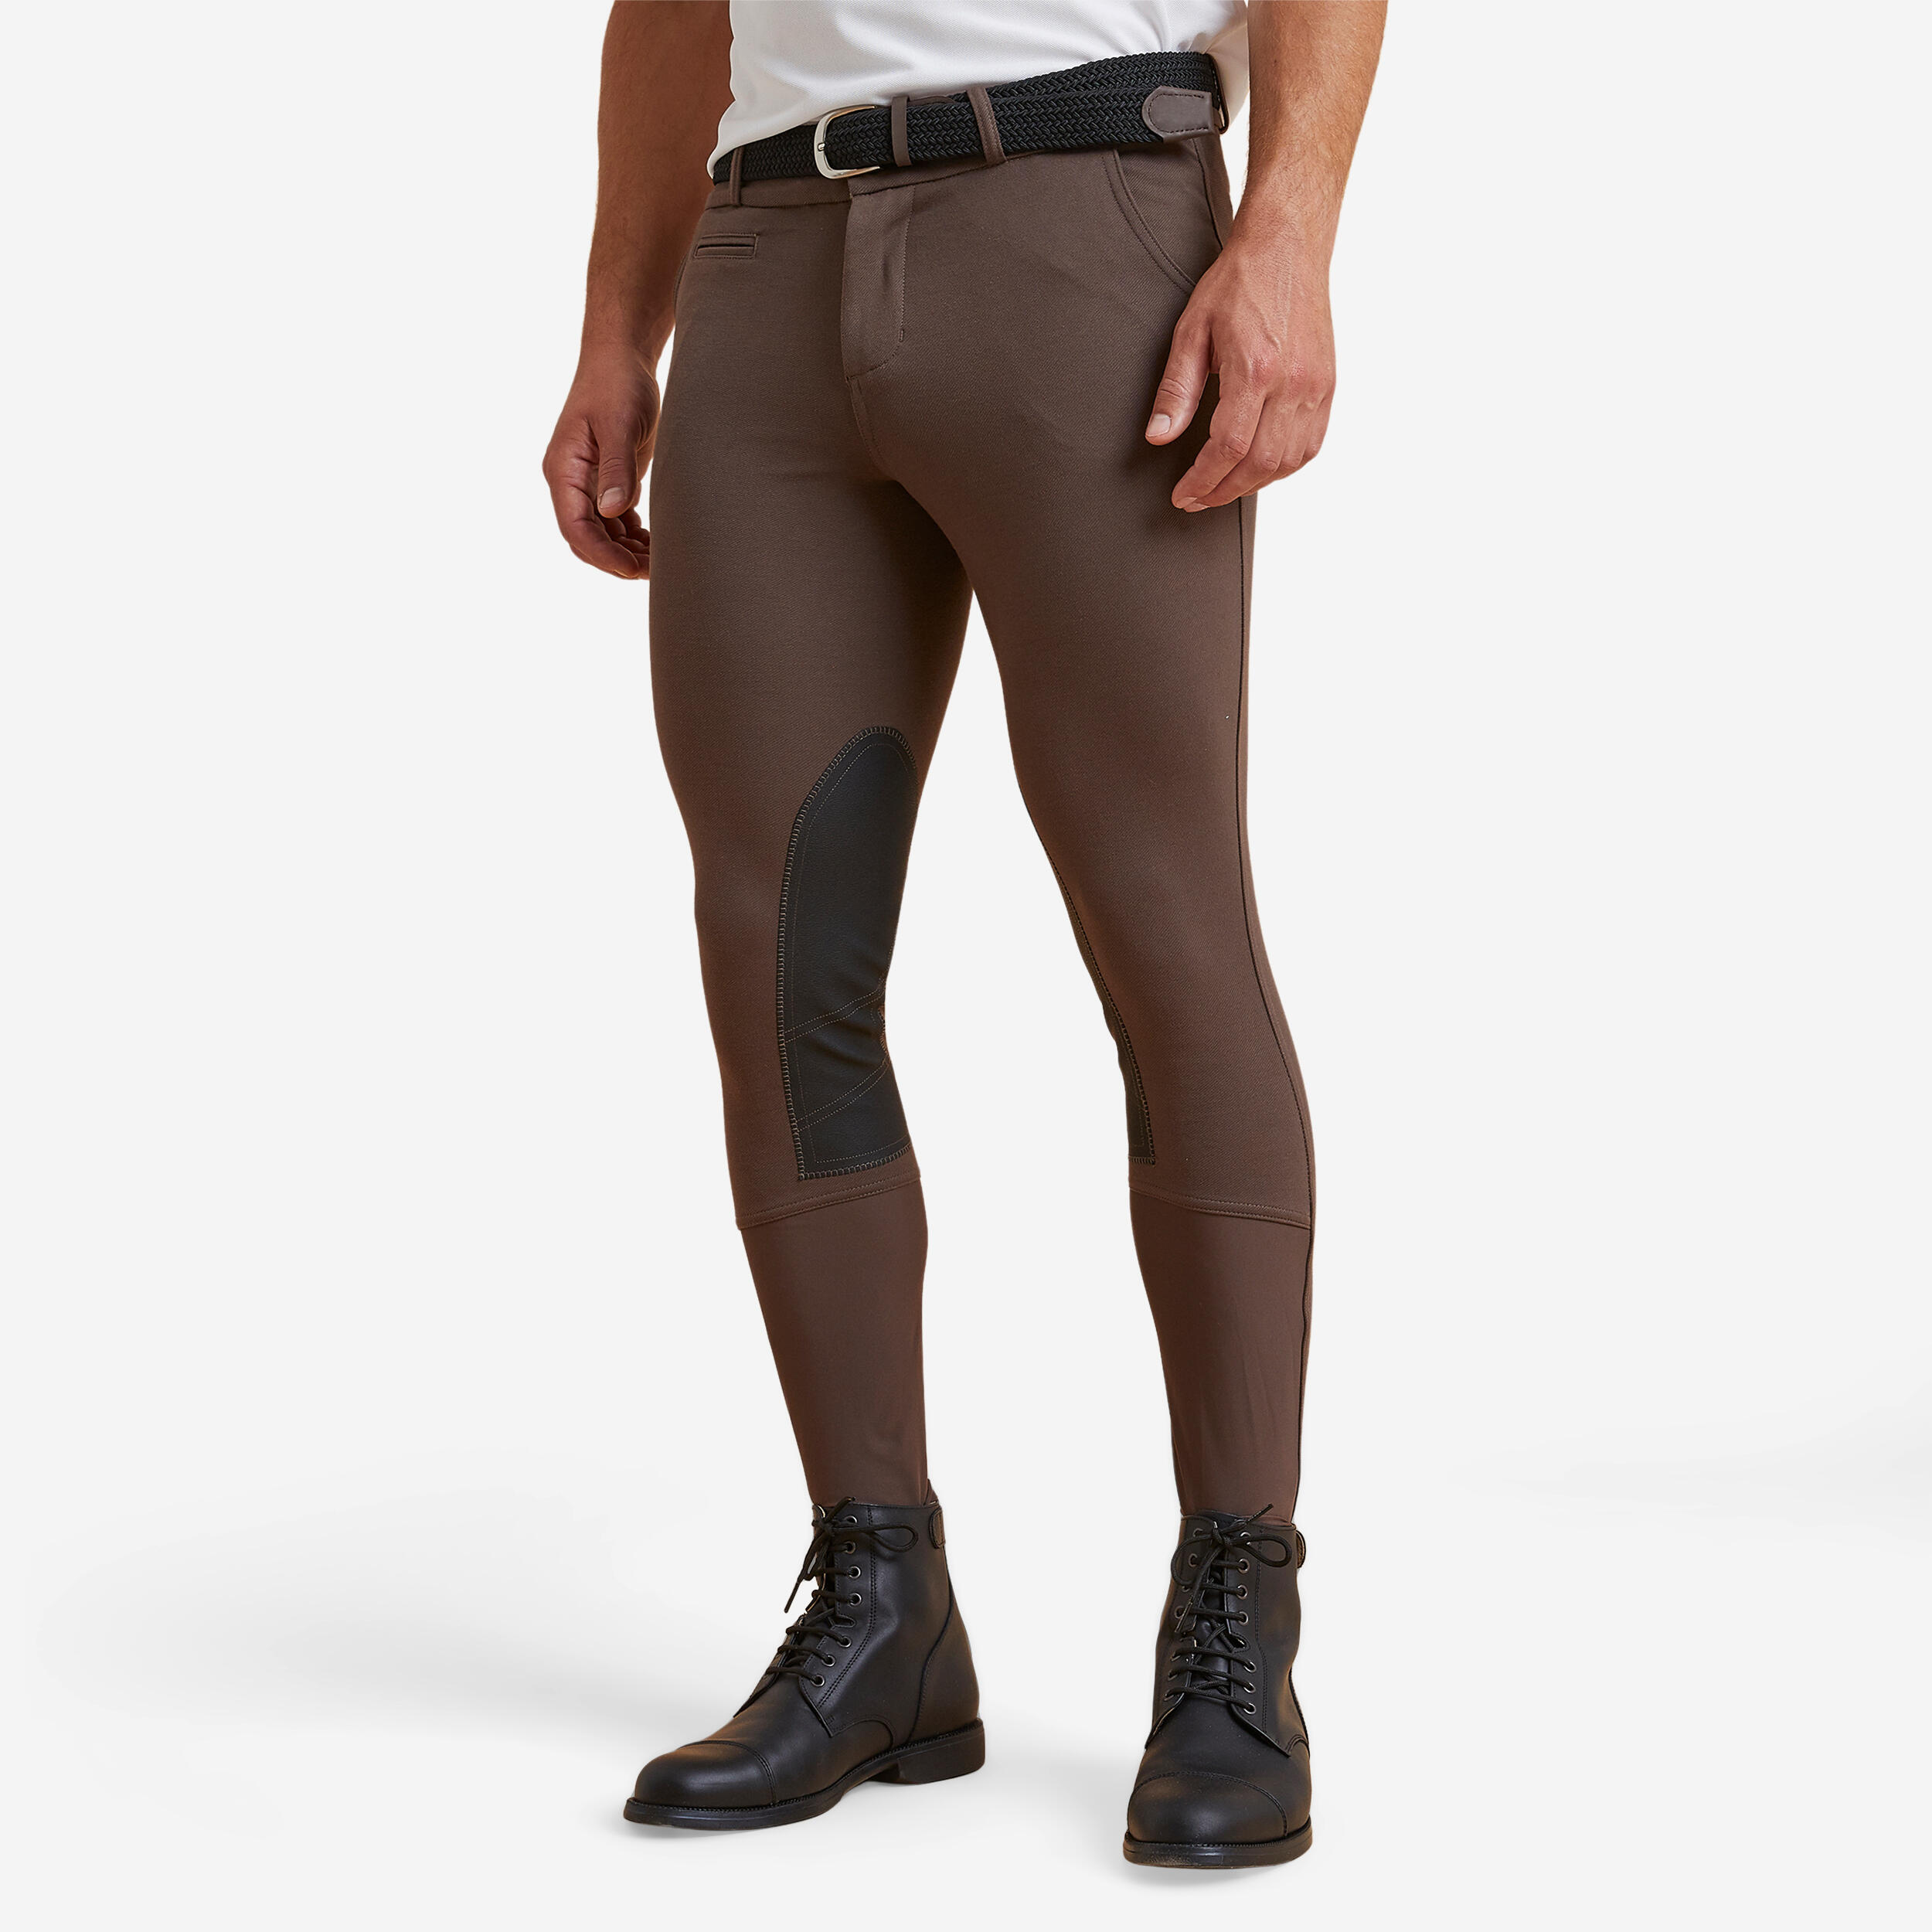 Horse Riding Tights and Equestrian Clothing - Performa Ride